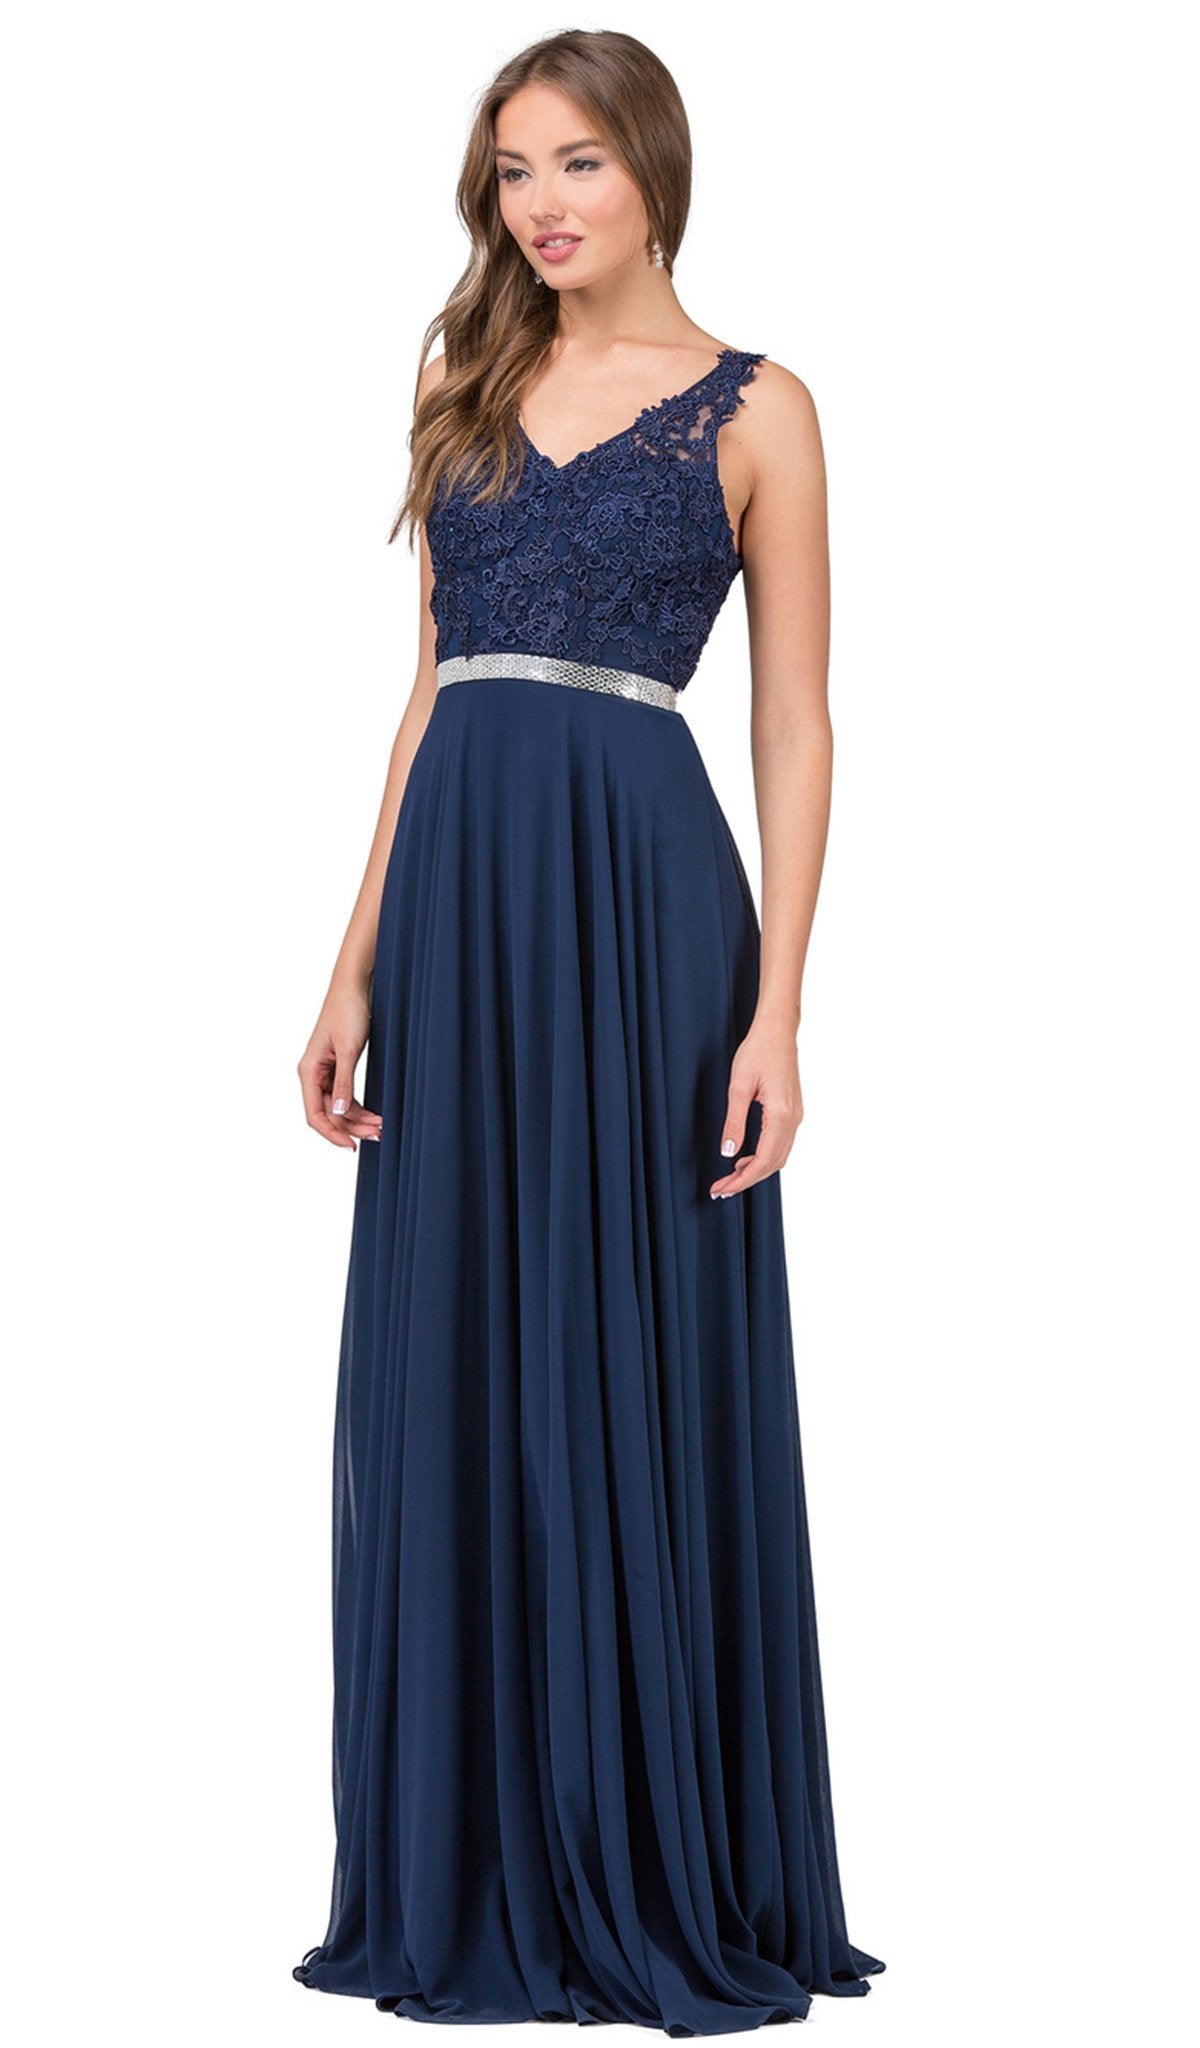 Dancing Queen - 2332 Lace V-neck A-line Prom Dress With Open Back Special Occasion Dress XS / Navy